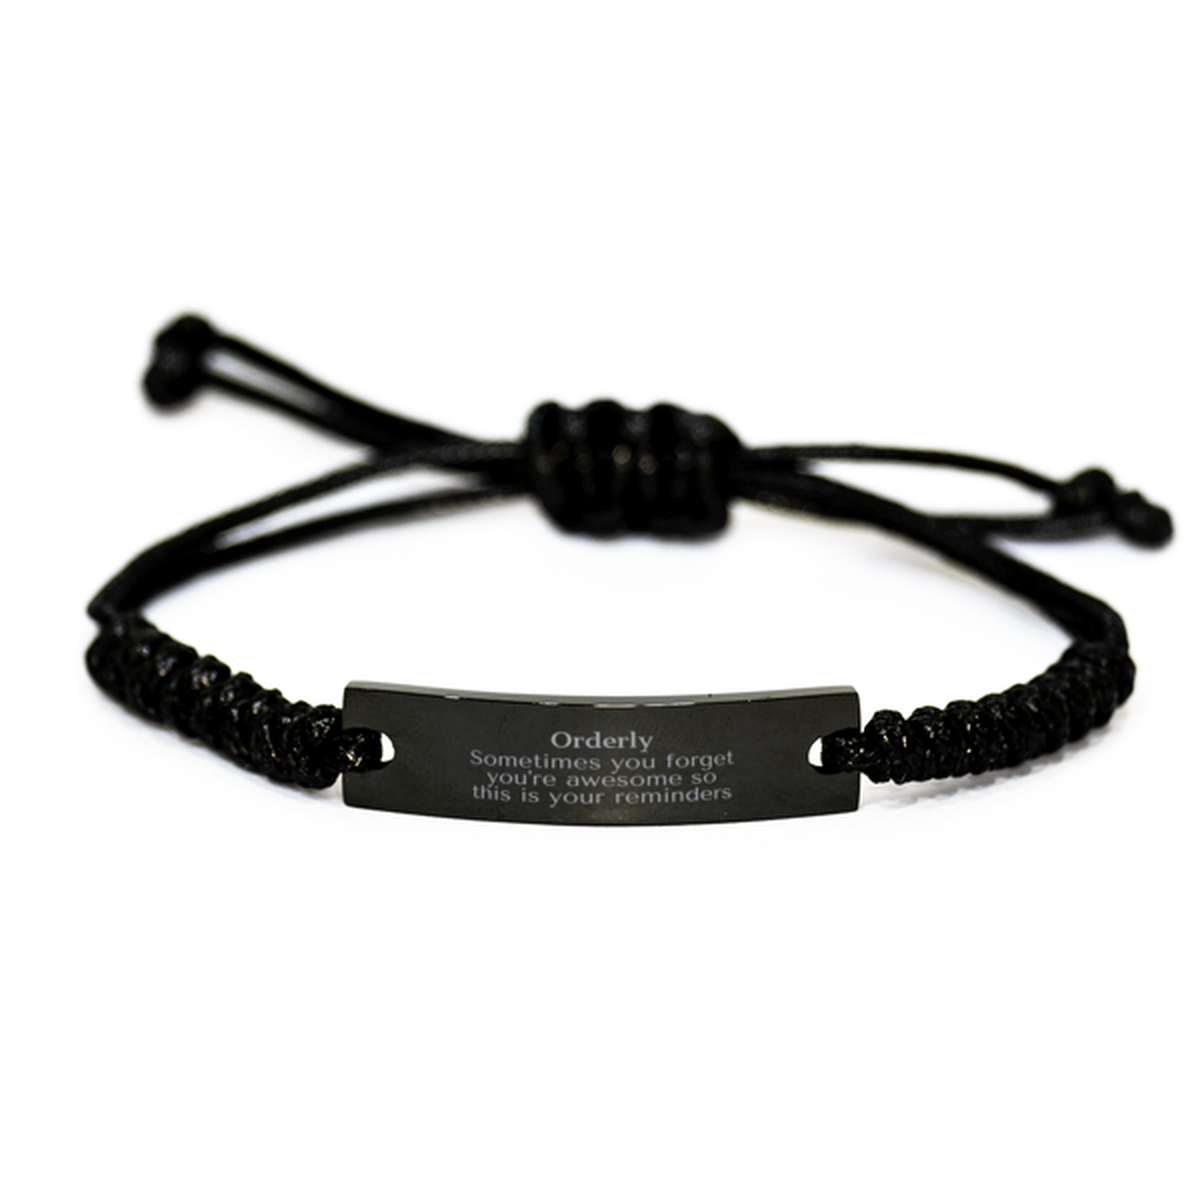 Sentimental Orderly Black Rope Bracelet, Orderly Sometimes you forget you're awesome so this is your reminders, Graduation Christmas Birthday Gifts for Orderly, Men, Women, Coworkers